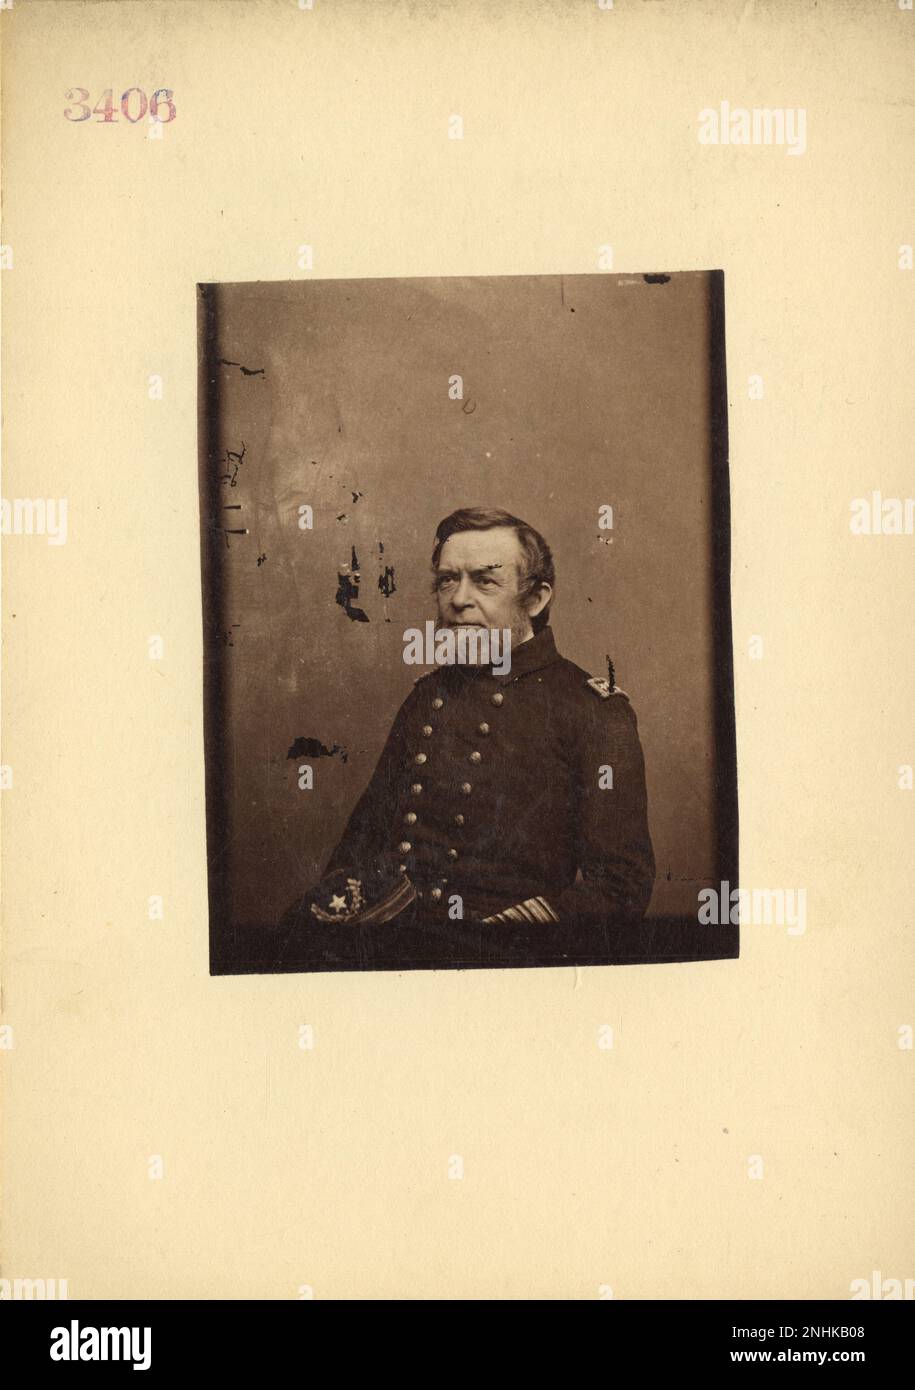 Rear Admiral Andrew H. Foote 19th Century Mathew Brady, Quartermaster, and Other Civil War Photographs Stock Photo